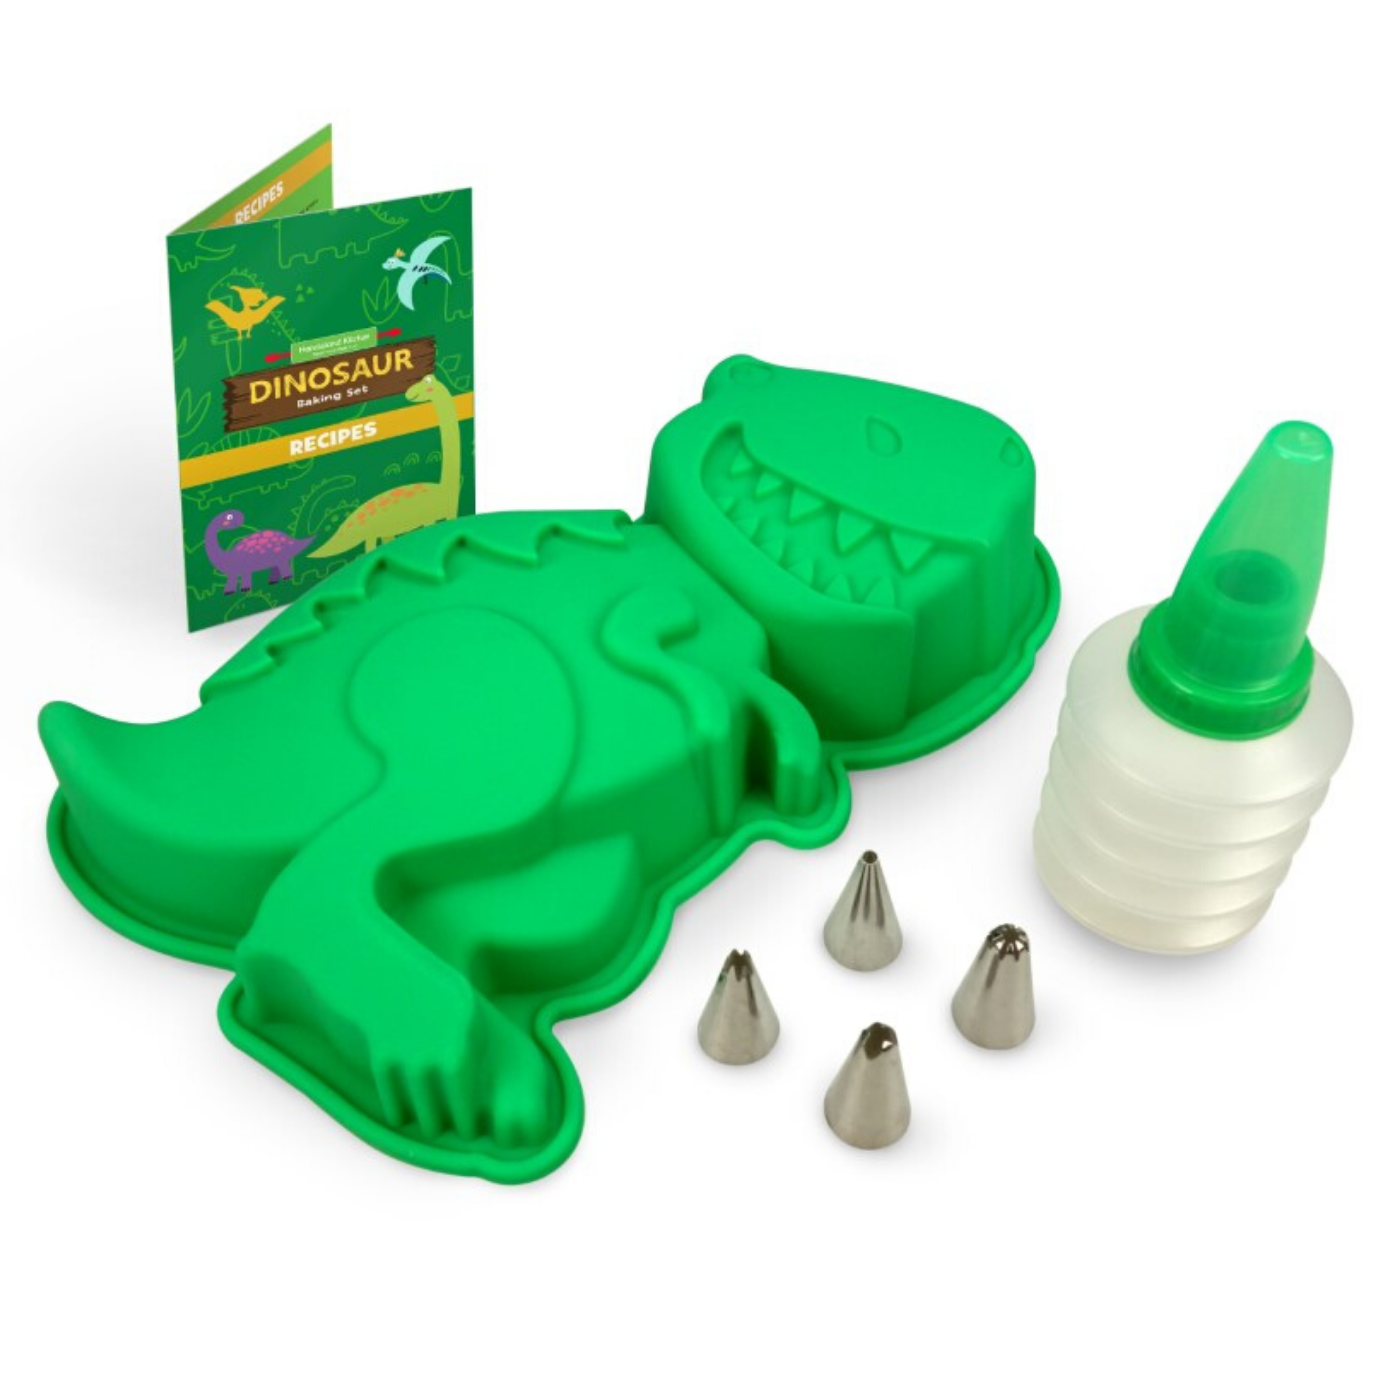 Out of box image of Dinosaur Large Cake Making Set containing 1 large silicone dinosaur cake mold, 1 frosting bottle with  cap, 1 frosting coupler with ring and 4 tips, and recipes.